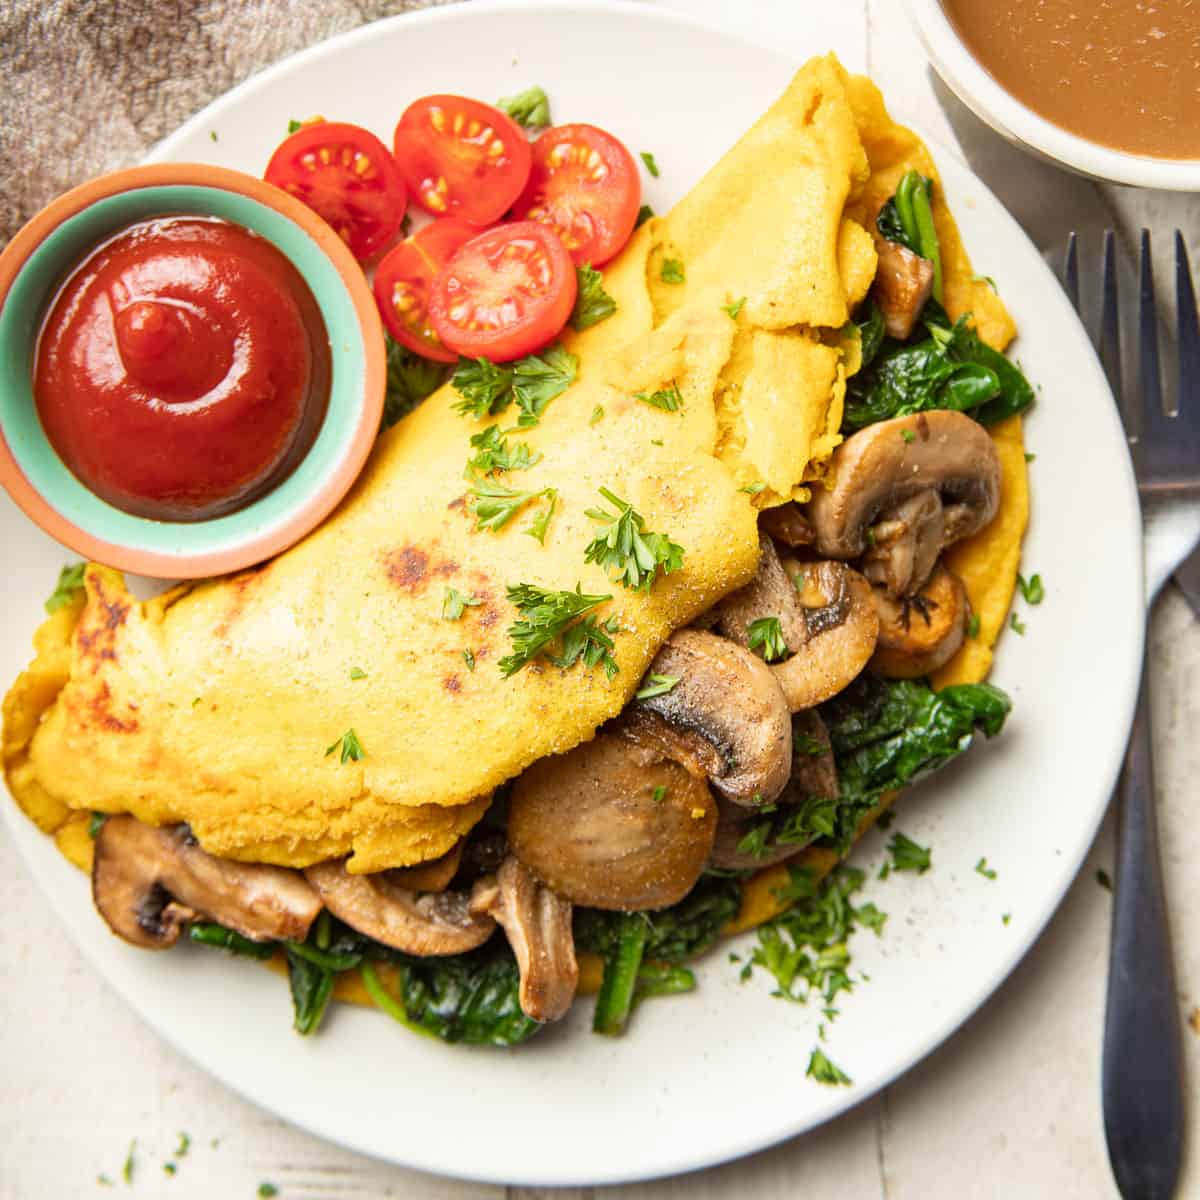 Vegan omelette on a plate with a plate of ketchup and cherry tomatoes.